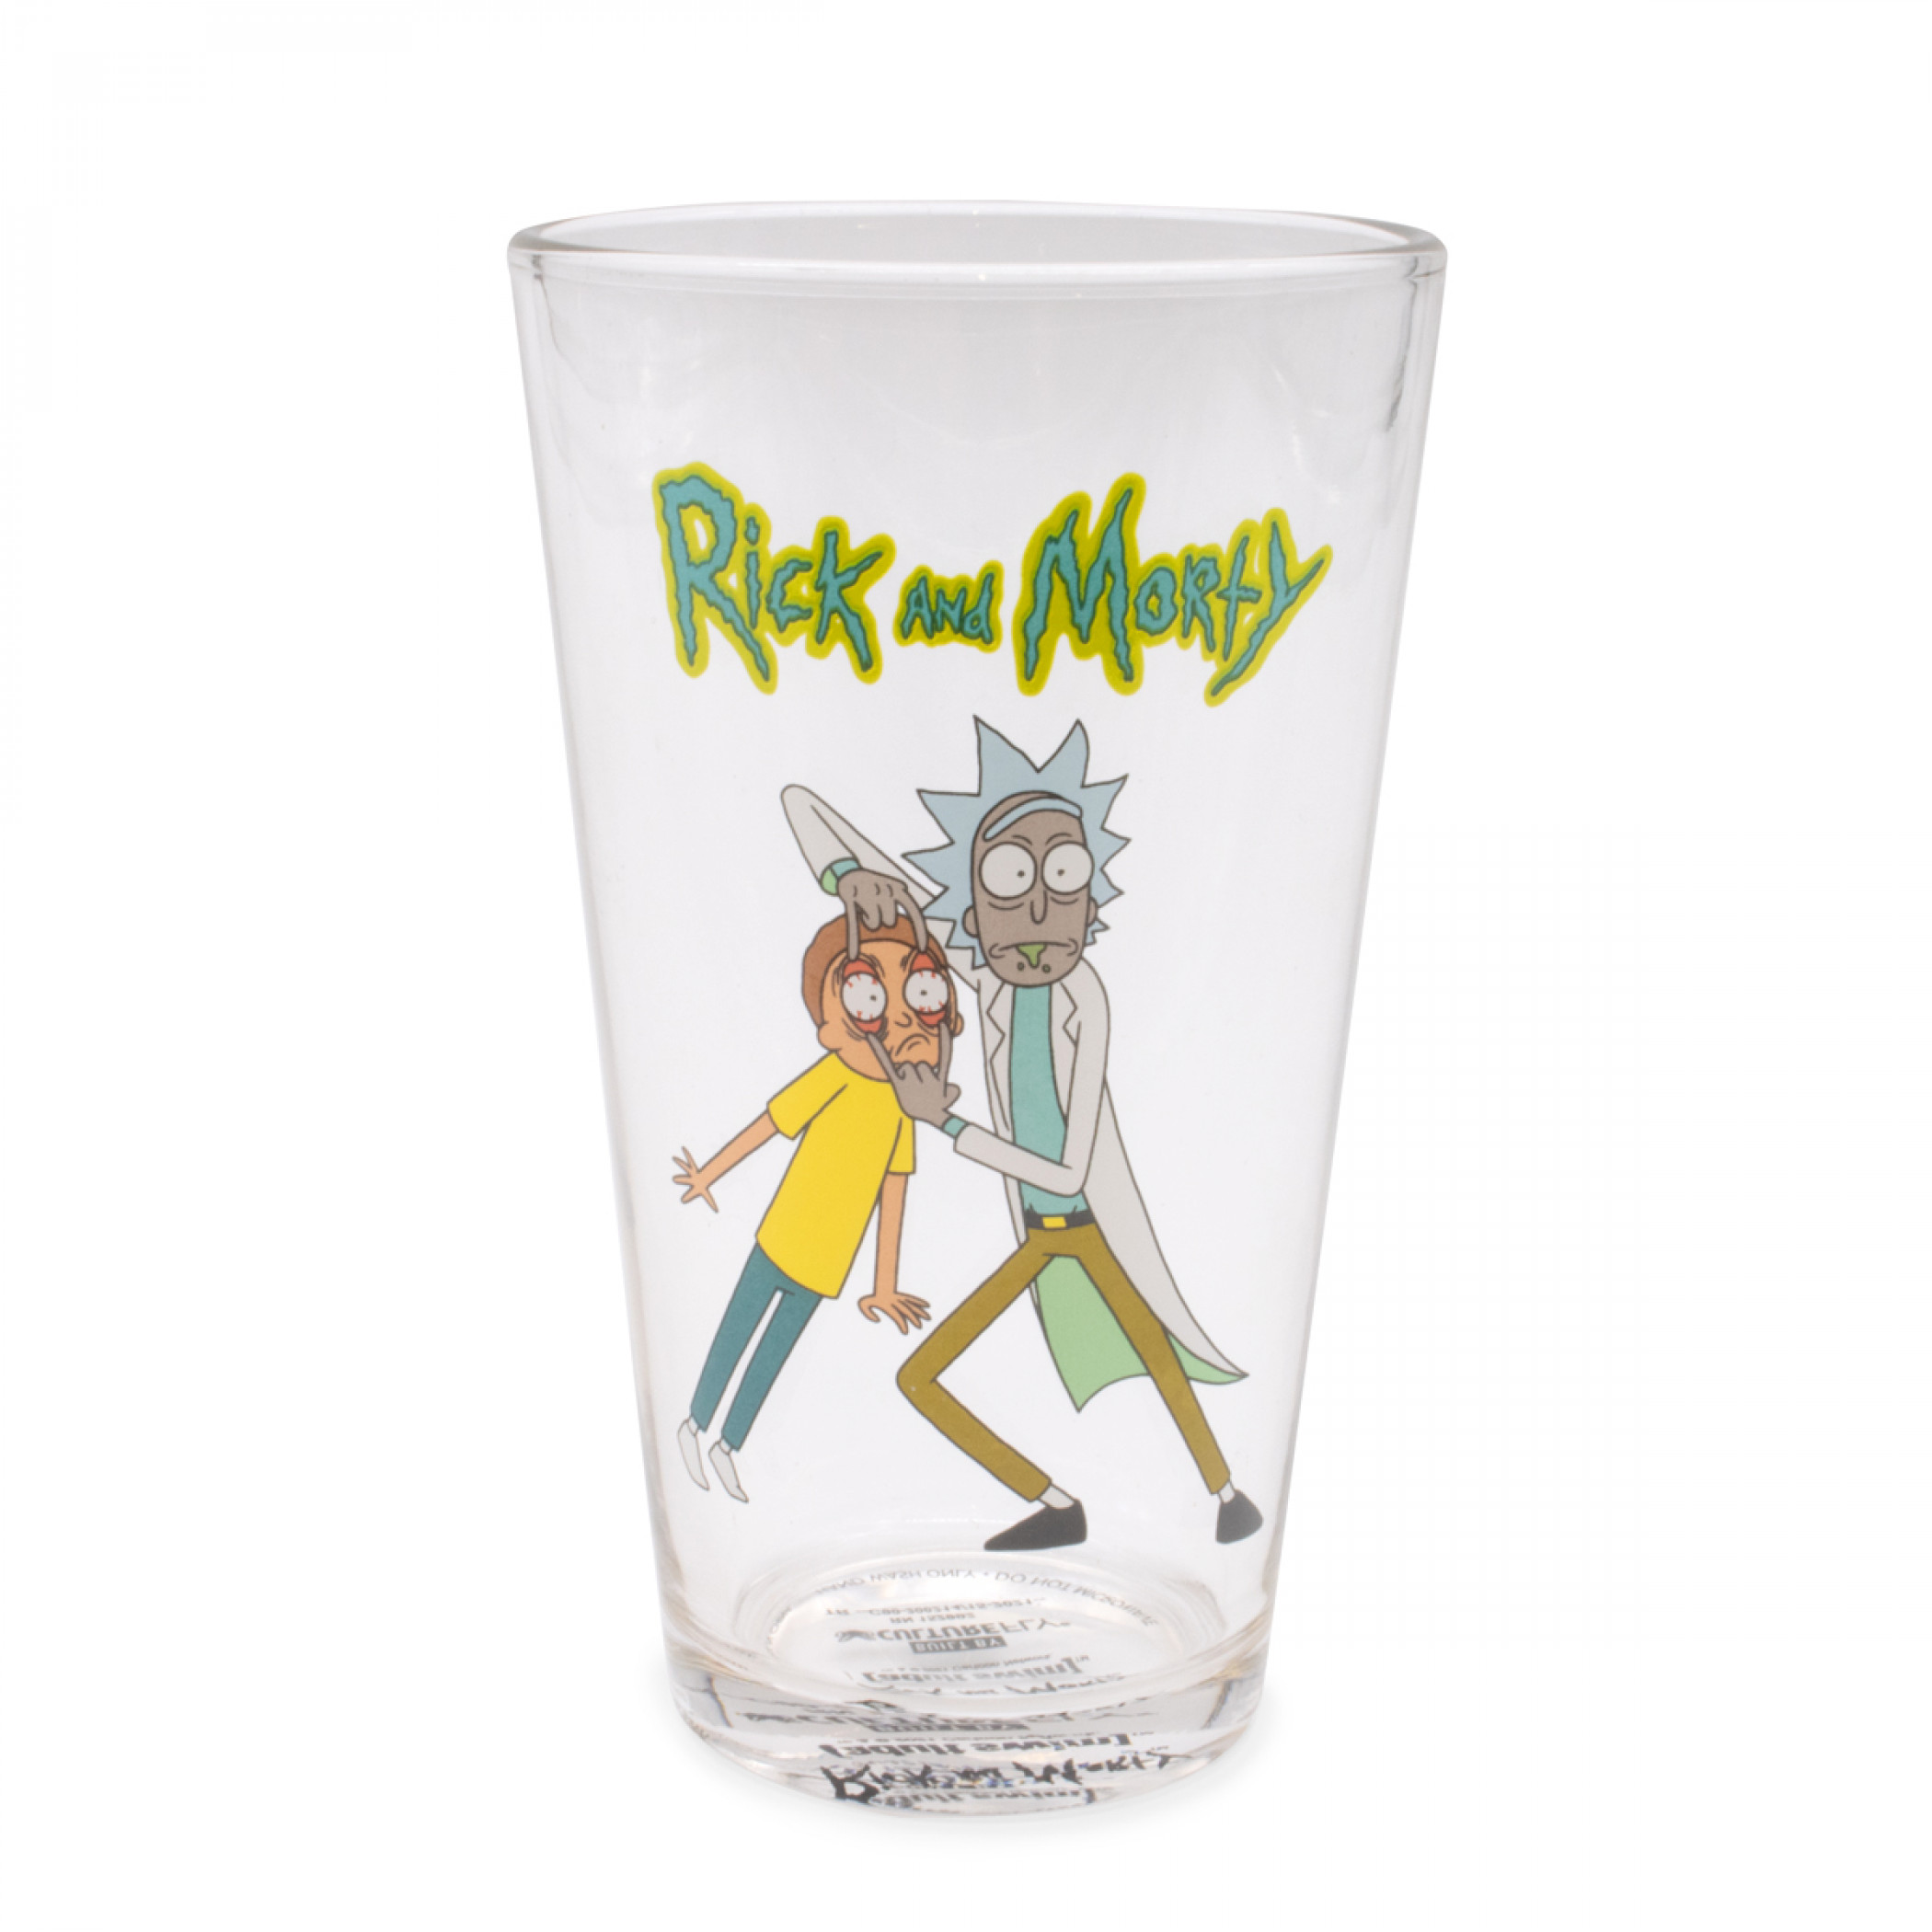 Rick And Morty 3-Pair Crew Socks and Pint Glass Gift Set